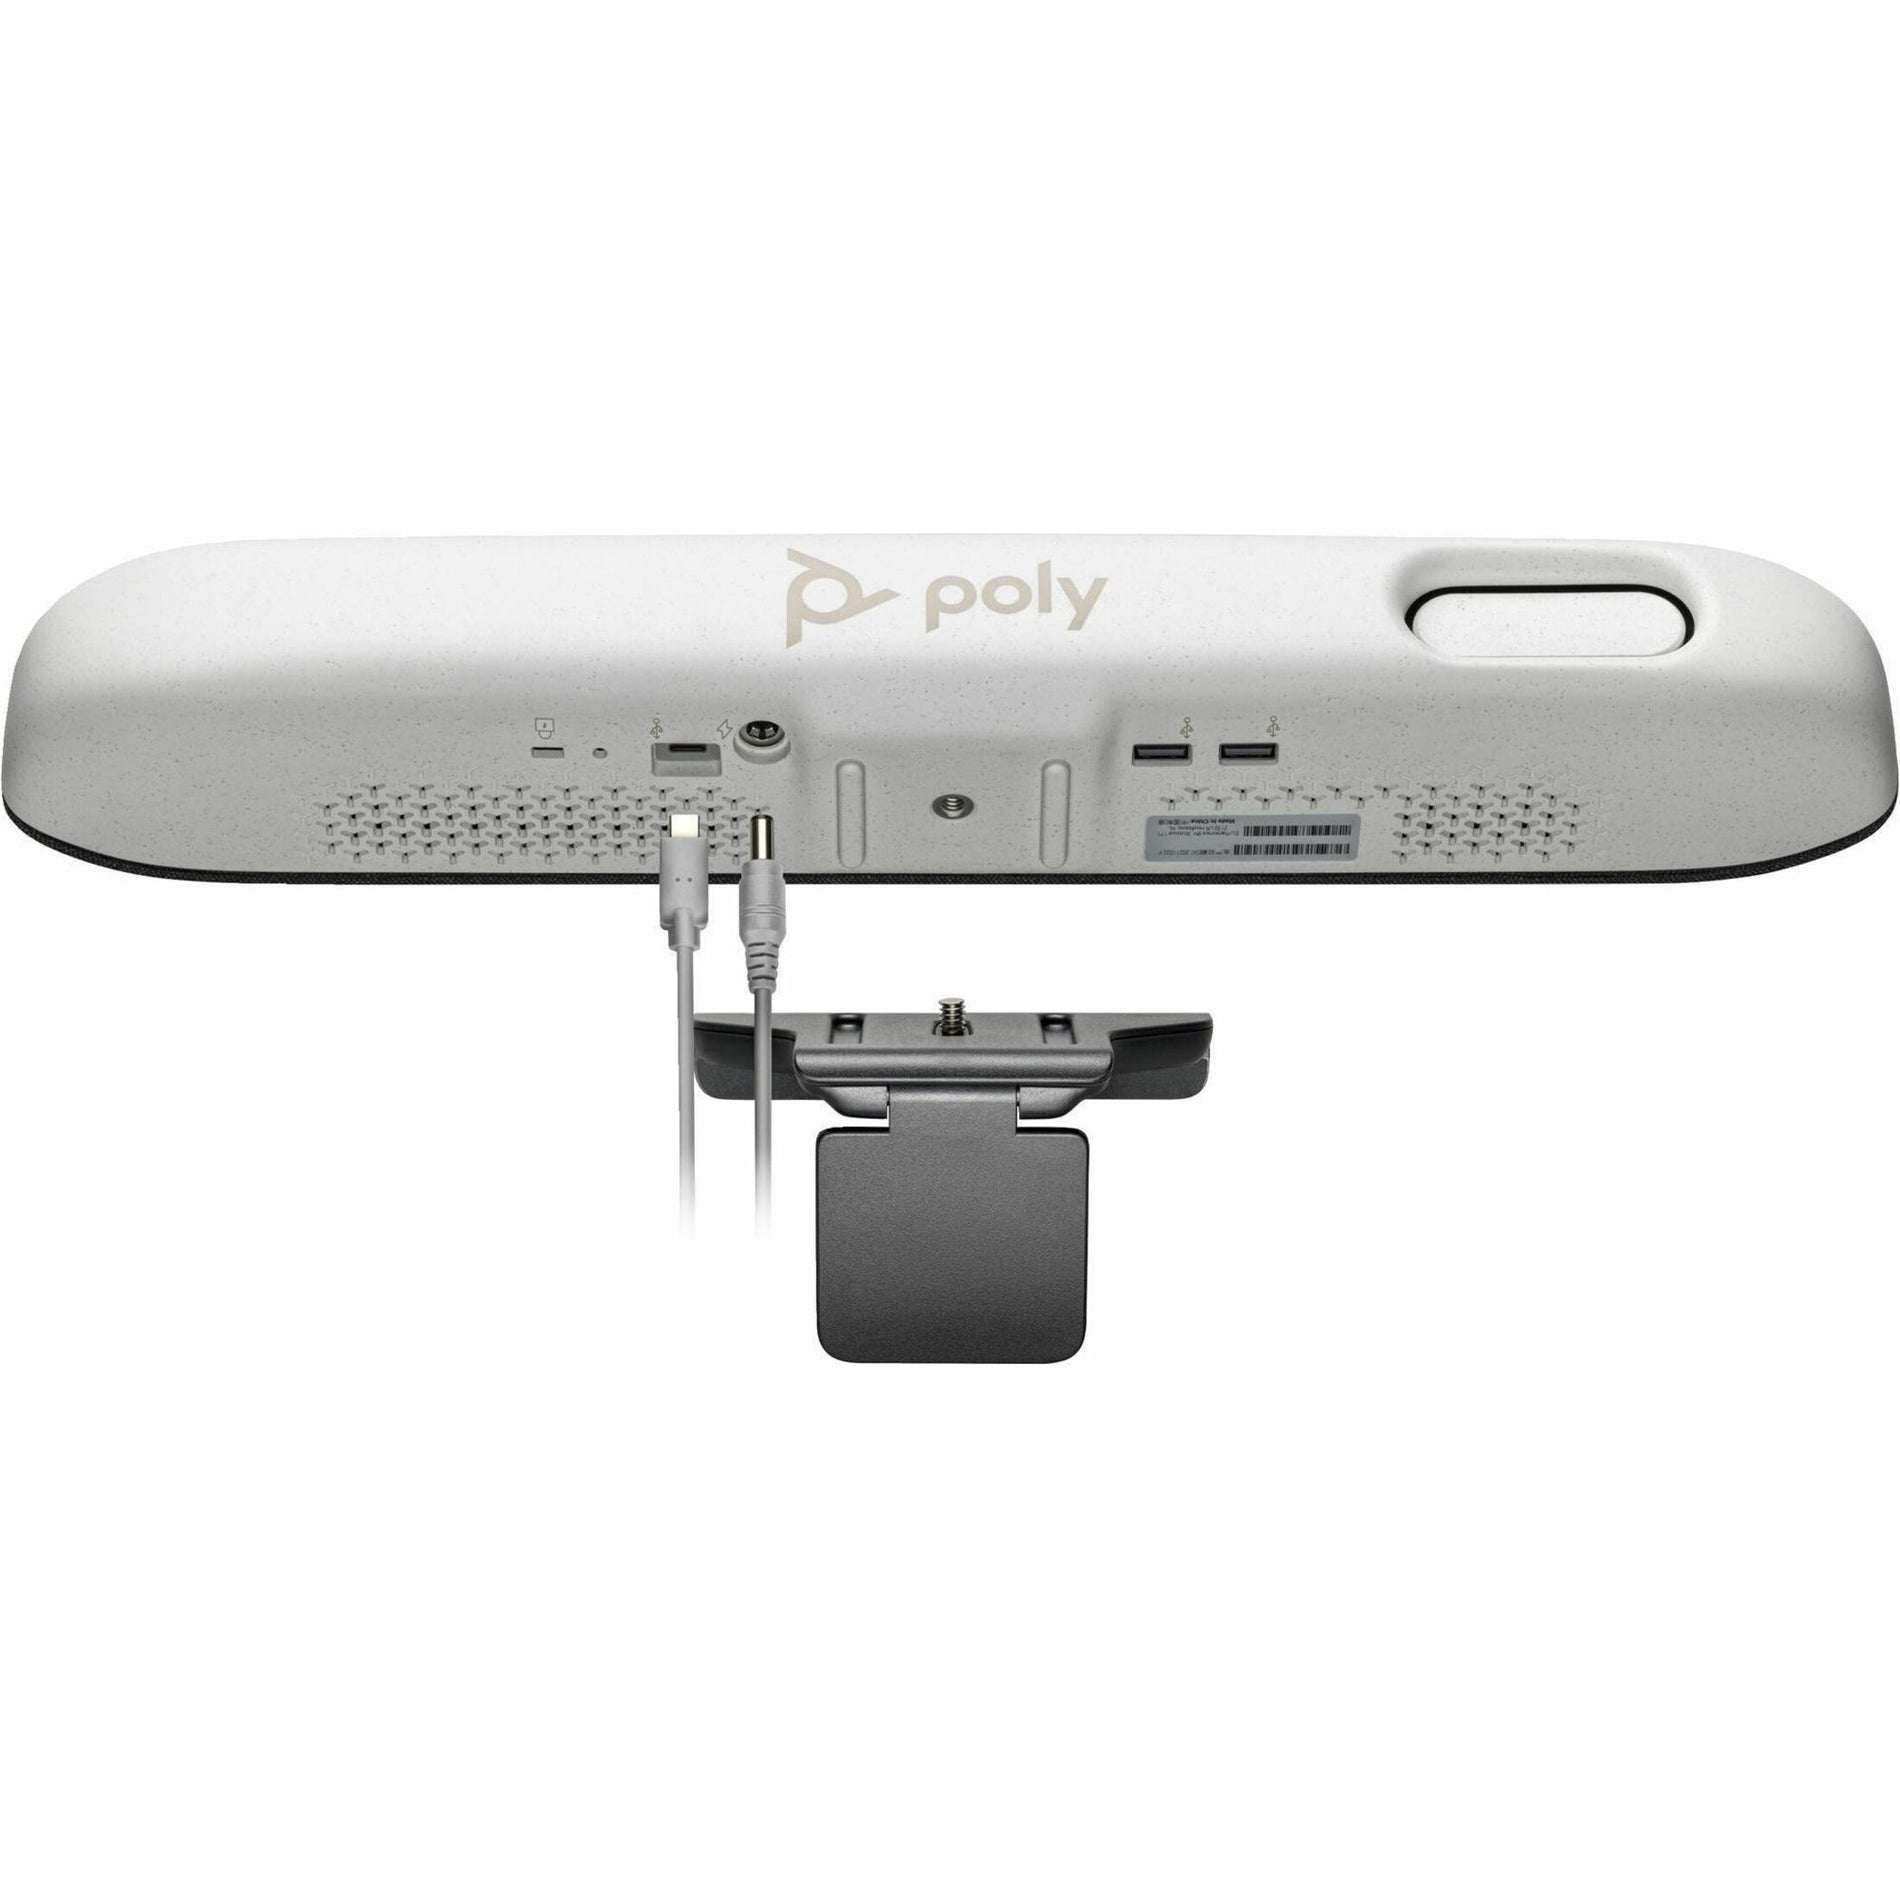 Poly Studio R30 Video Conference Equipment (842F3AA#ABA)